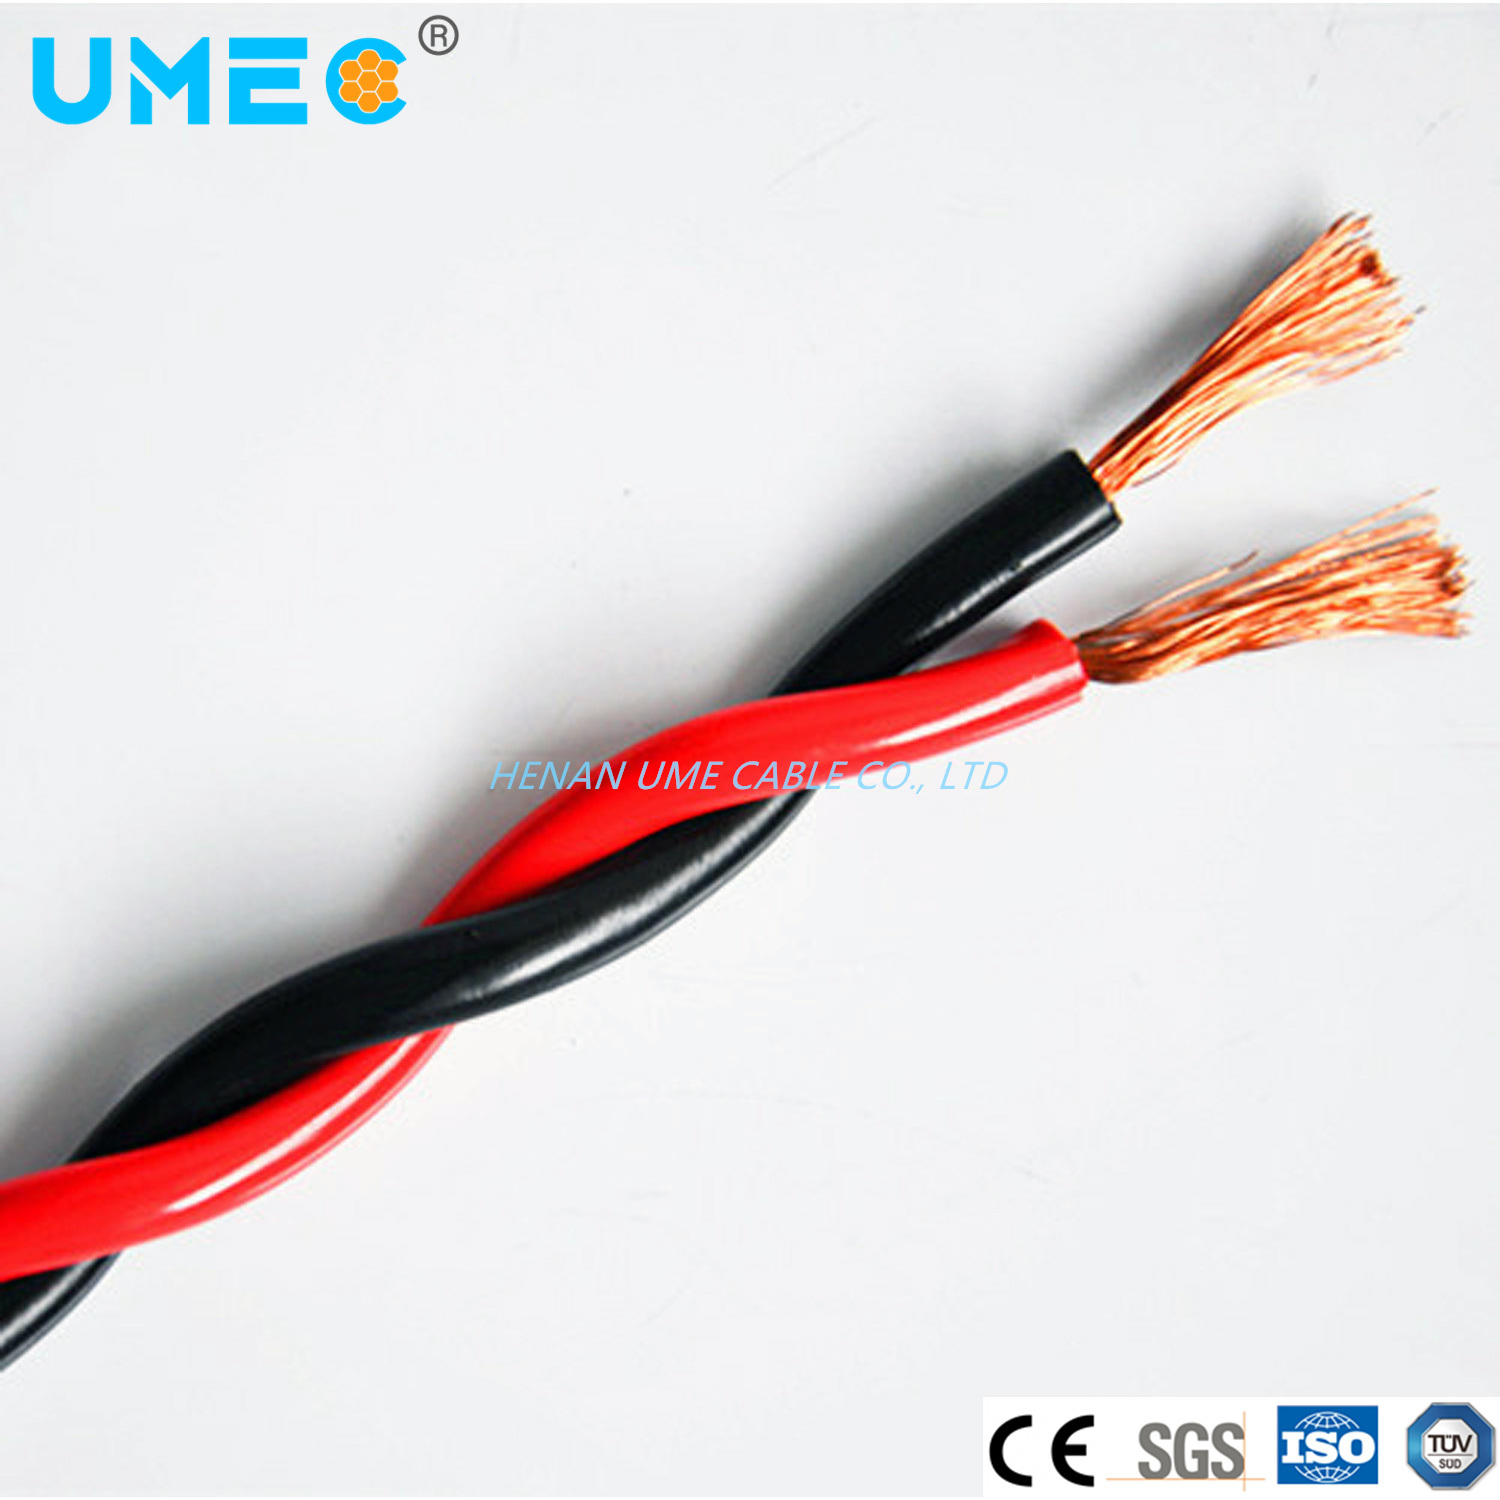 
                China Hersteller Red & Black RVS Electric Cable 450/750V PVC Twisted Electric Draht mit dem besten Preis
            